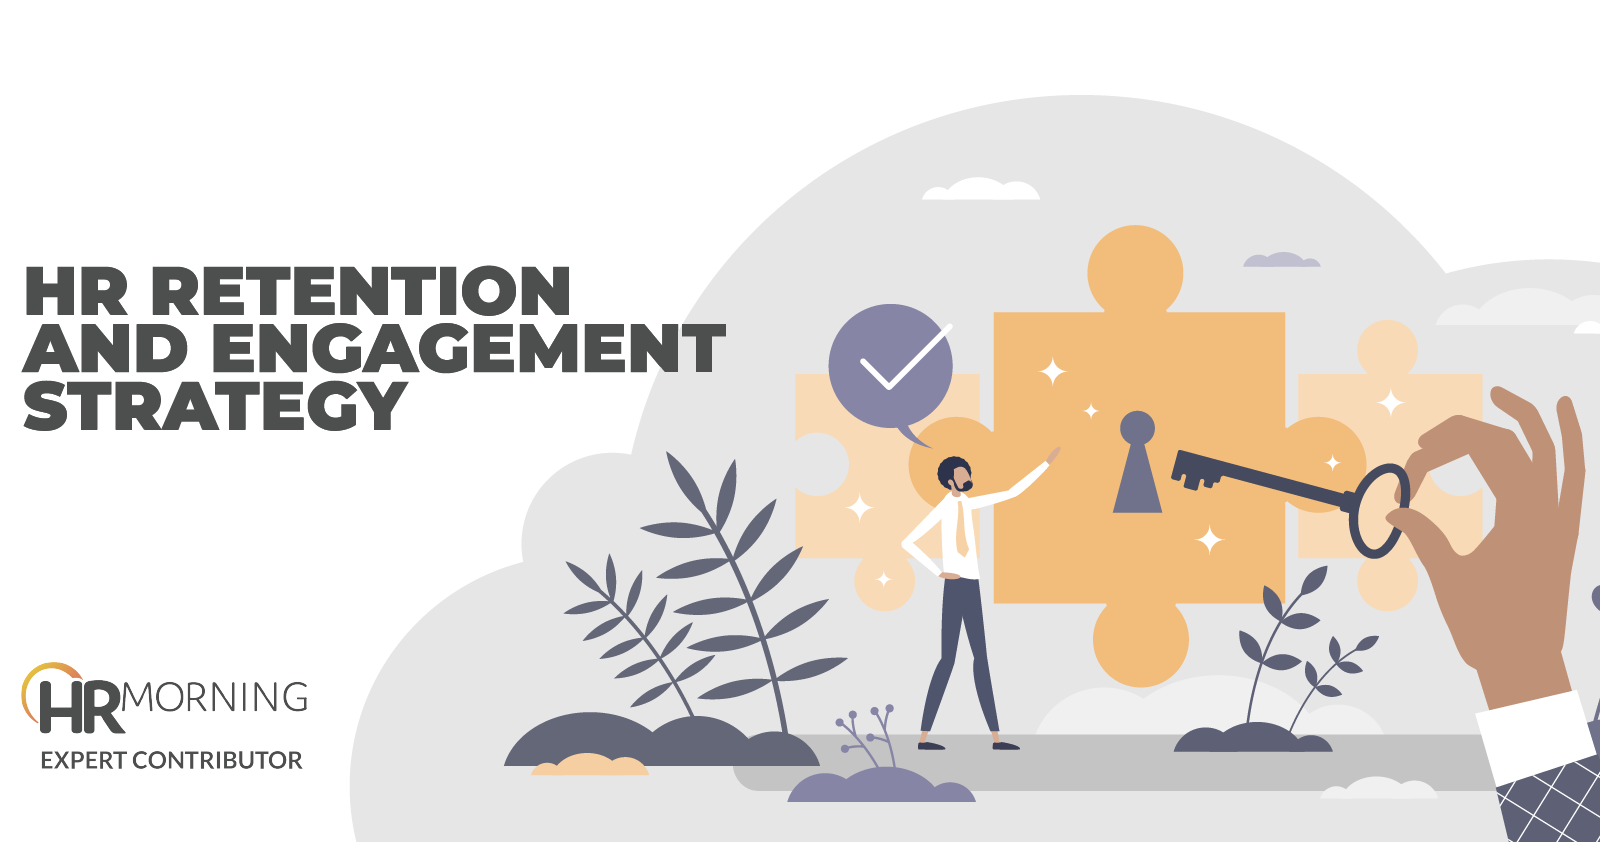 HR retention and engagement strategy